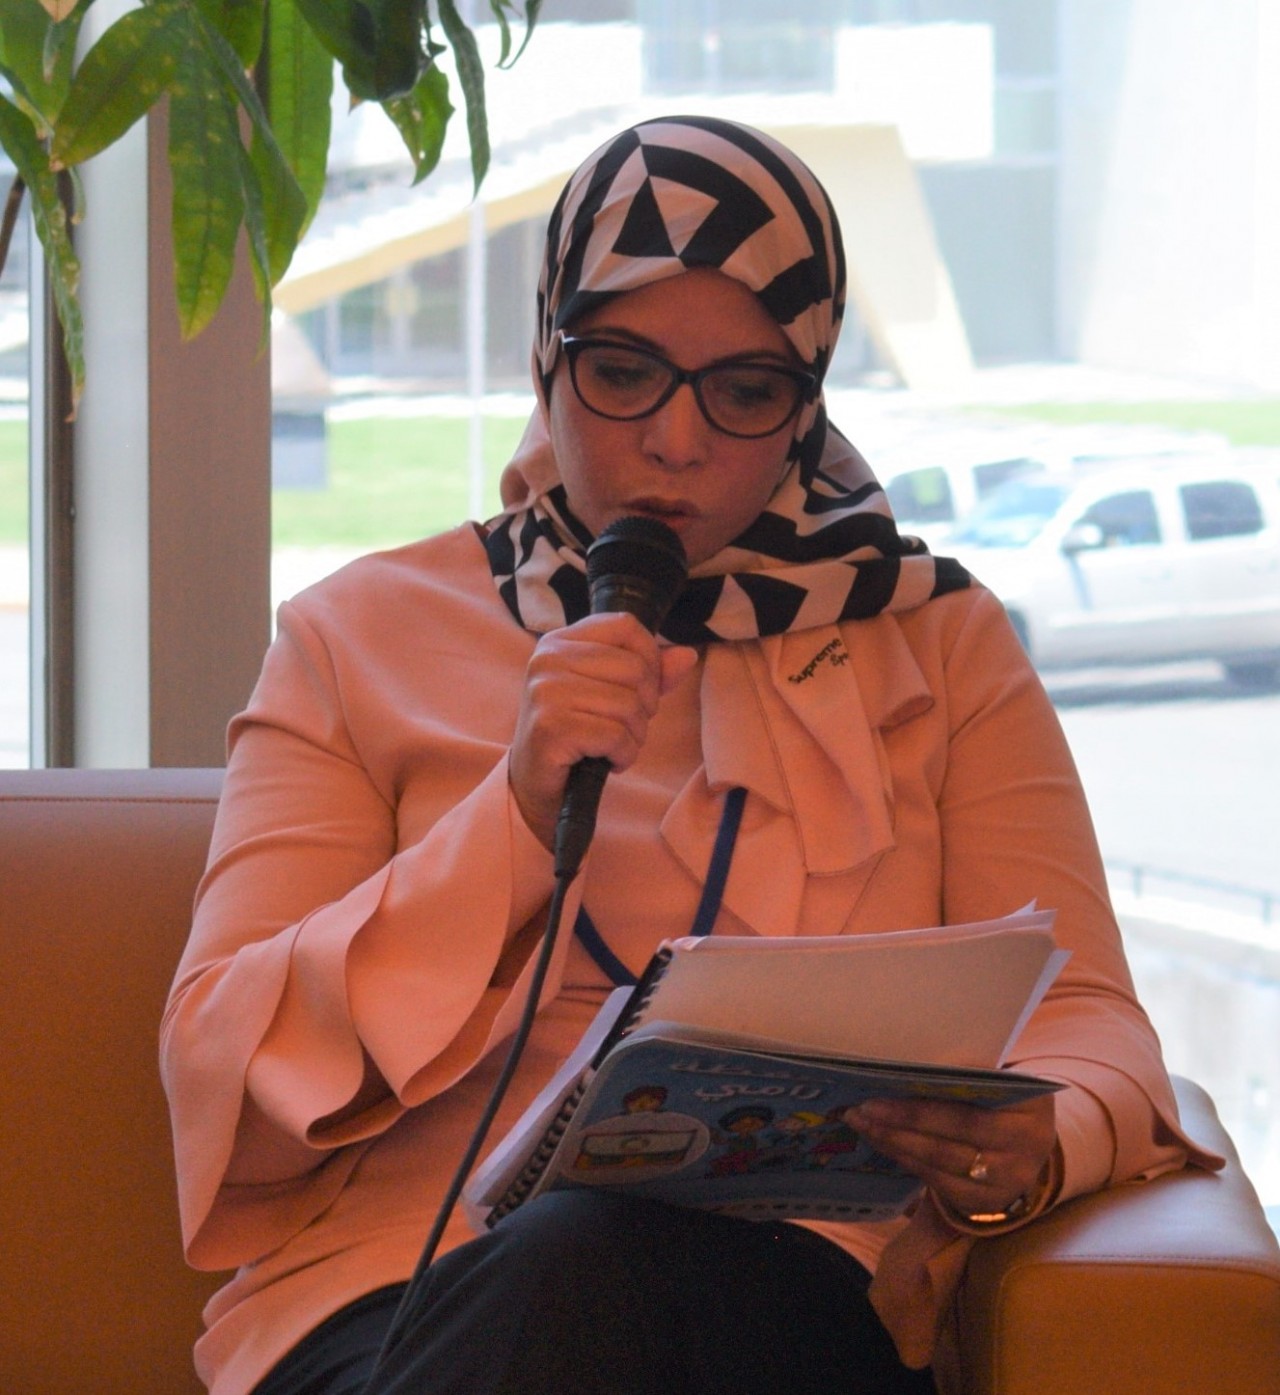 Zoubeida Bouallagui, Head of Unit for Technical Monitoring and Dissemination, Public Reading Directorate of the Ministry of Culture, Tunisia